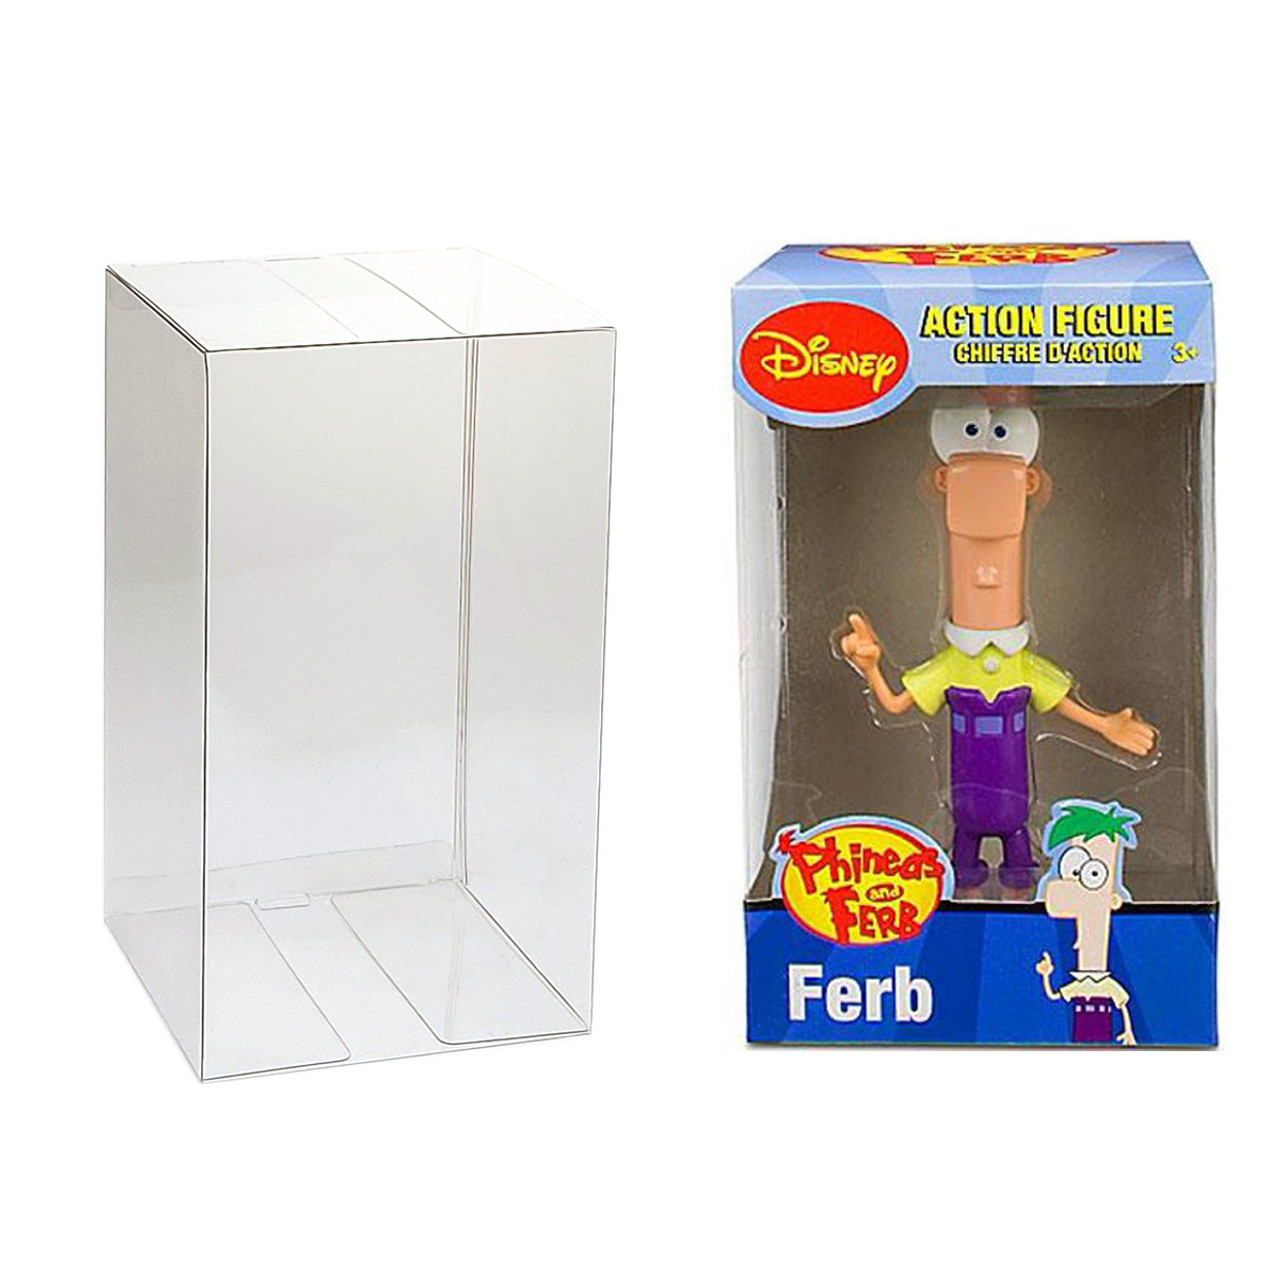 Katana Collectibles Protector For Funko Disney Store Action Figure Phineas  and Ferb